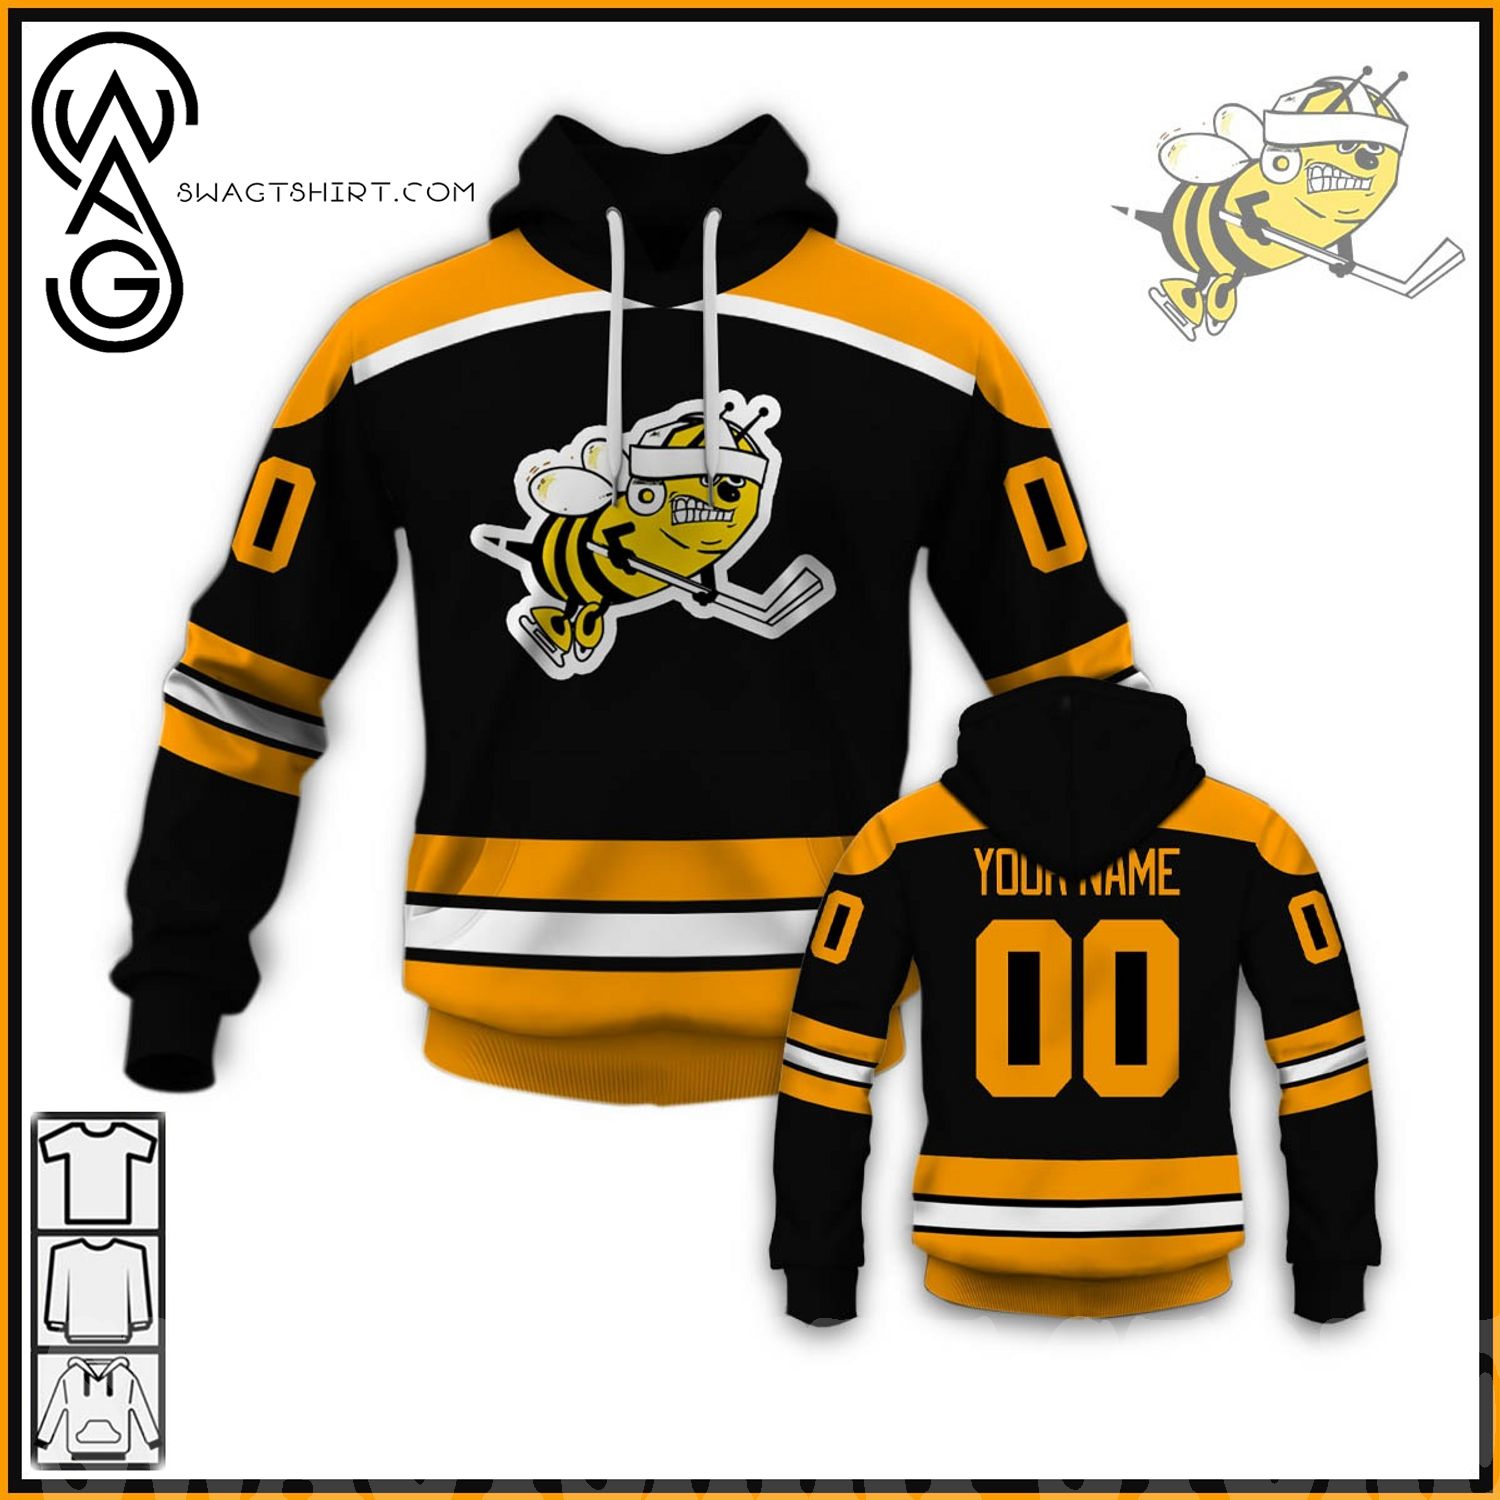 Vintage Bruins Sweater Unexpected Boston Bruins Gift Idea - Personalized  Gifts: Family, Sports, Occasions, Trending